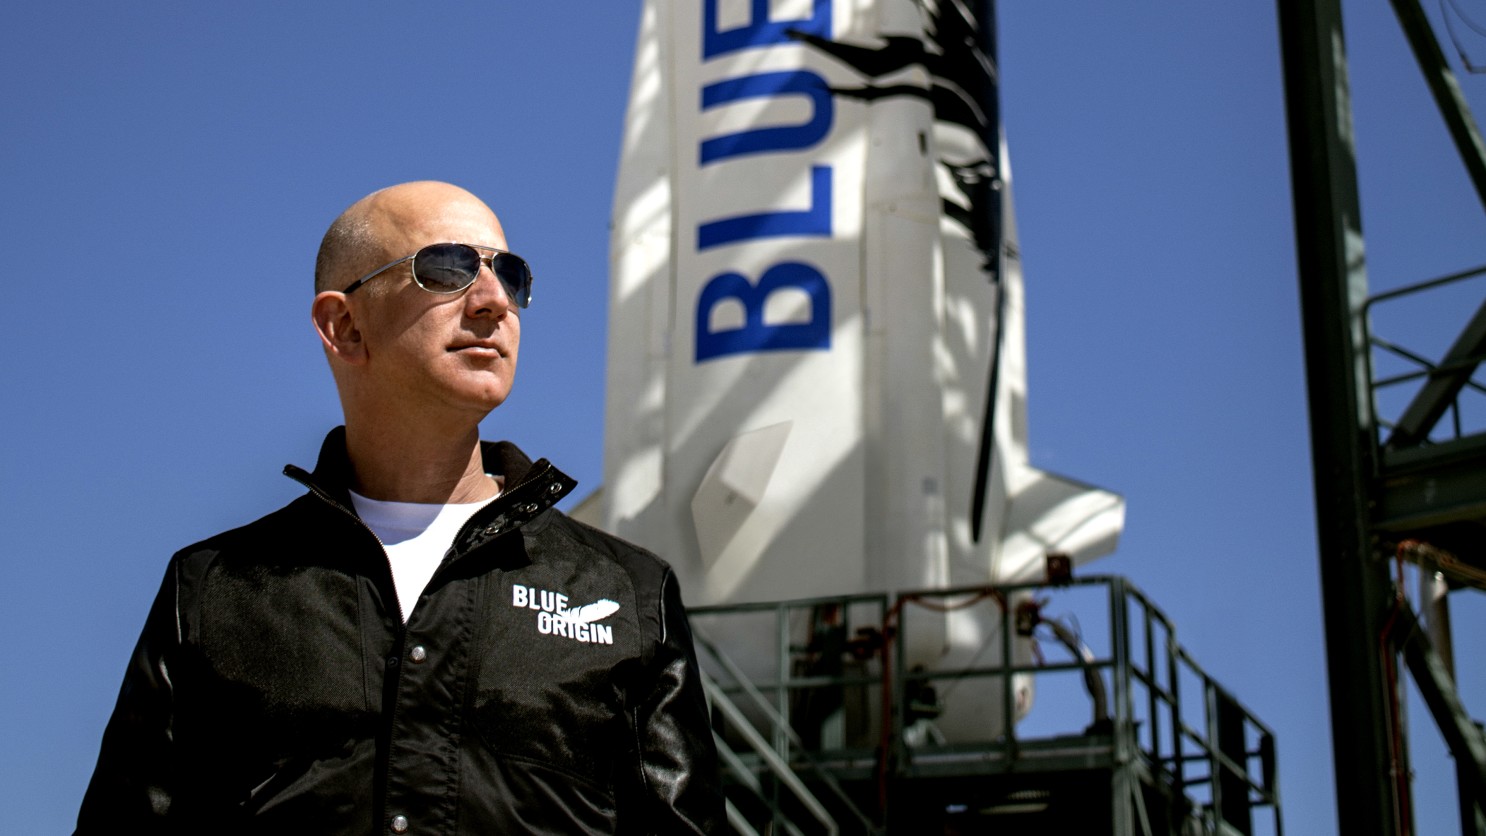 Jeff Bezos Launch Into Space, Makes History